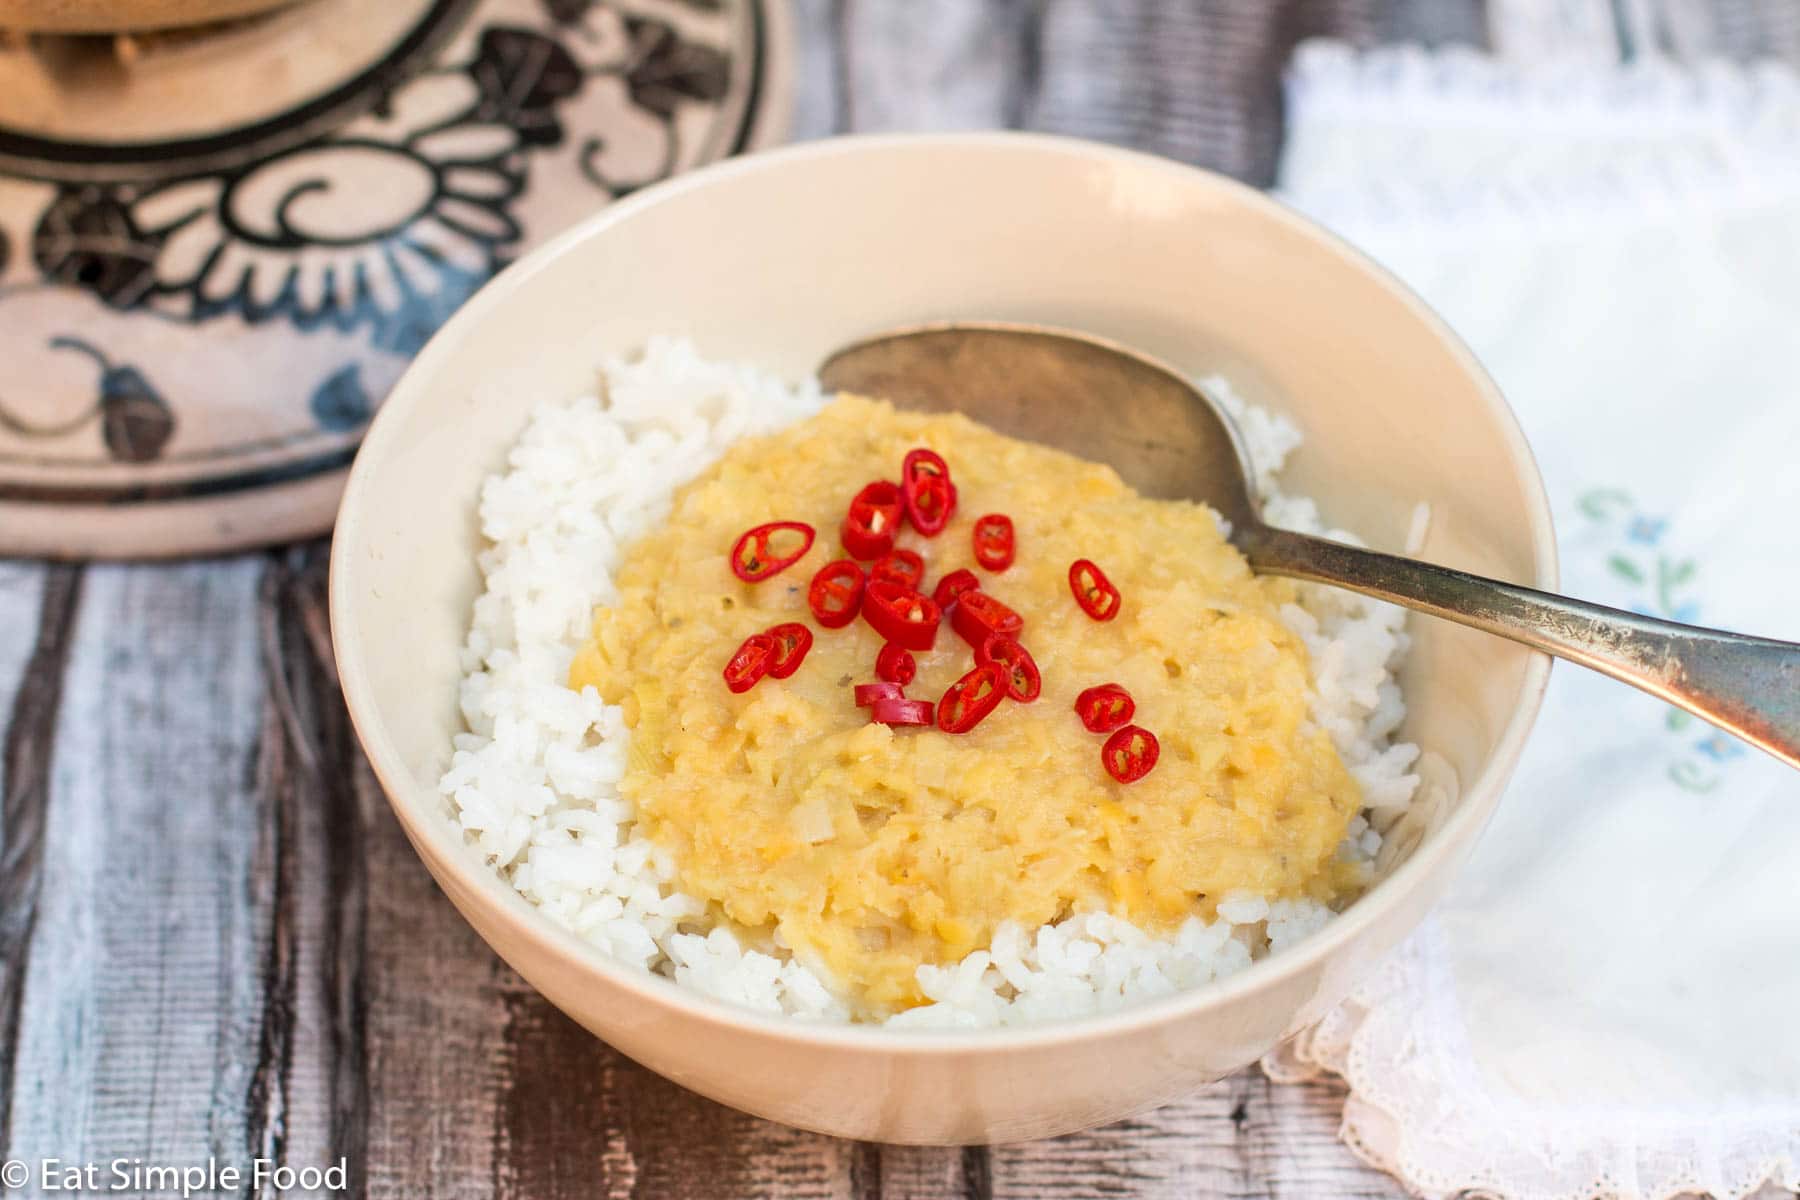 Light tan bowl of yellow cooked lentils over white rice with sliced red chili garnish.